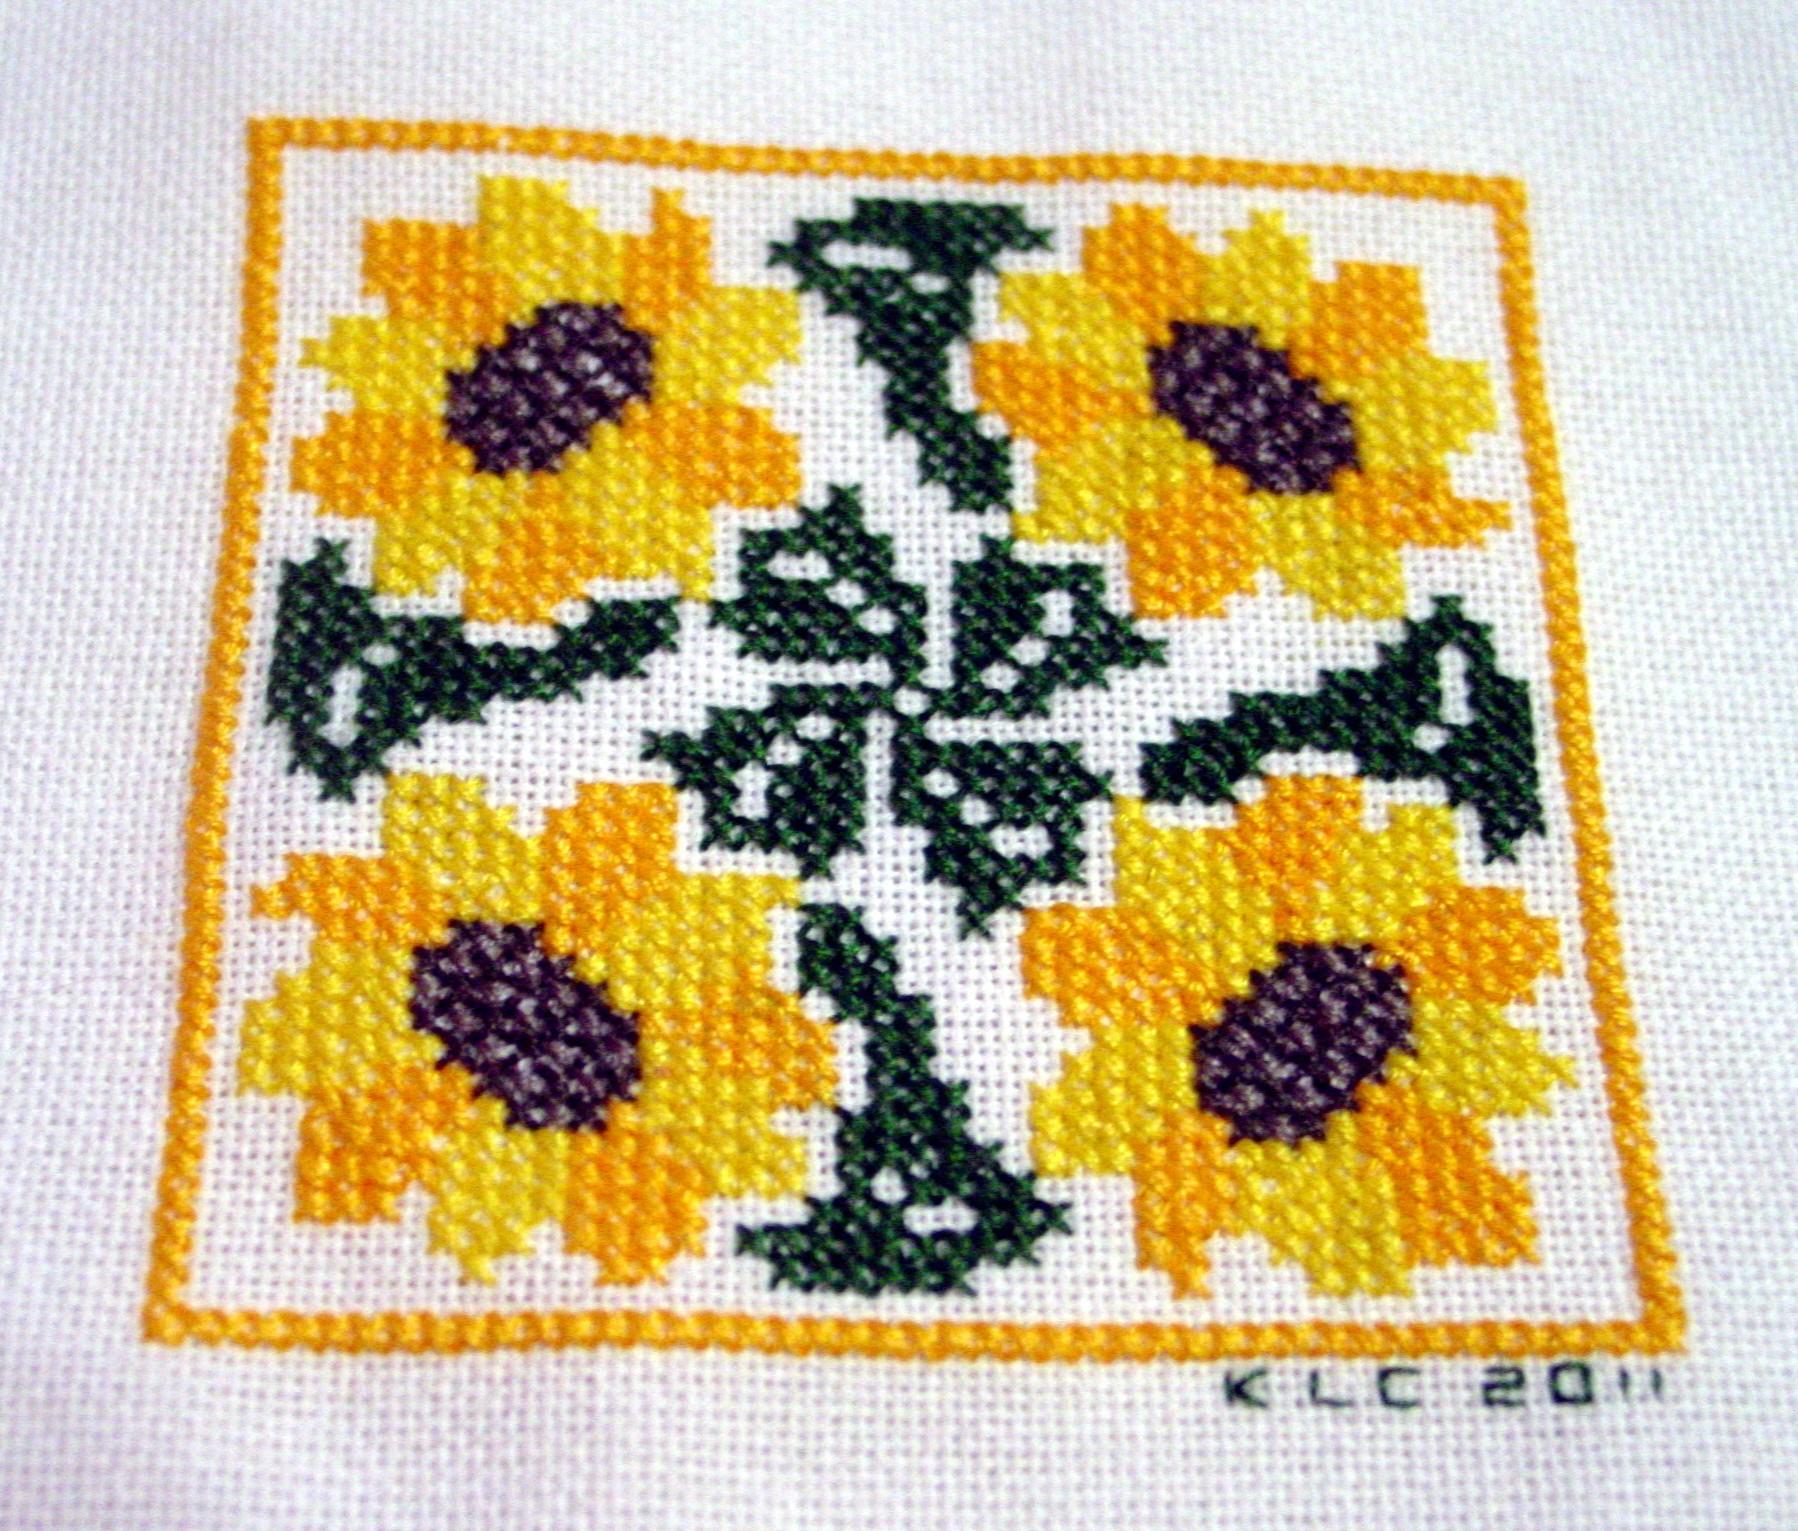 How To Do Cross Stitch Embroidery (Sewing)